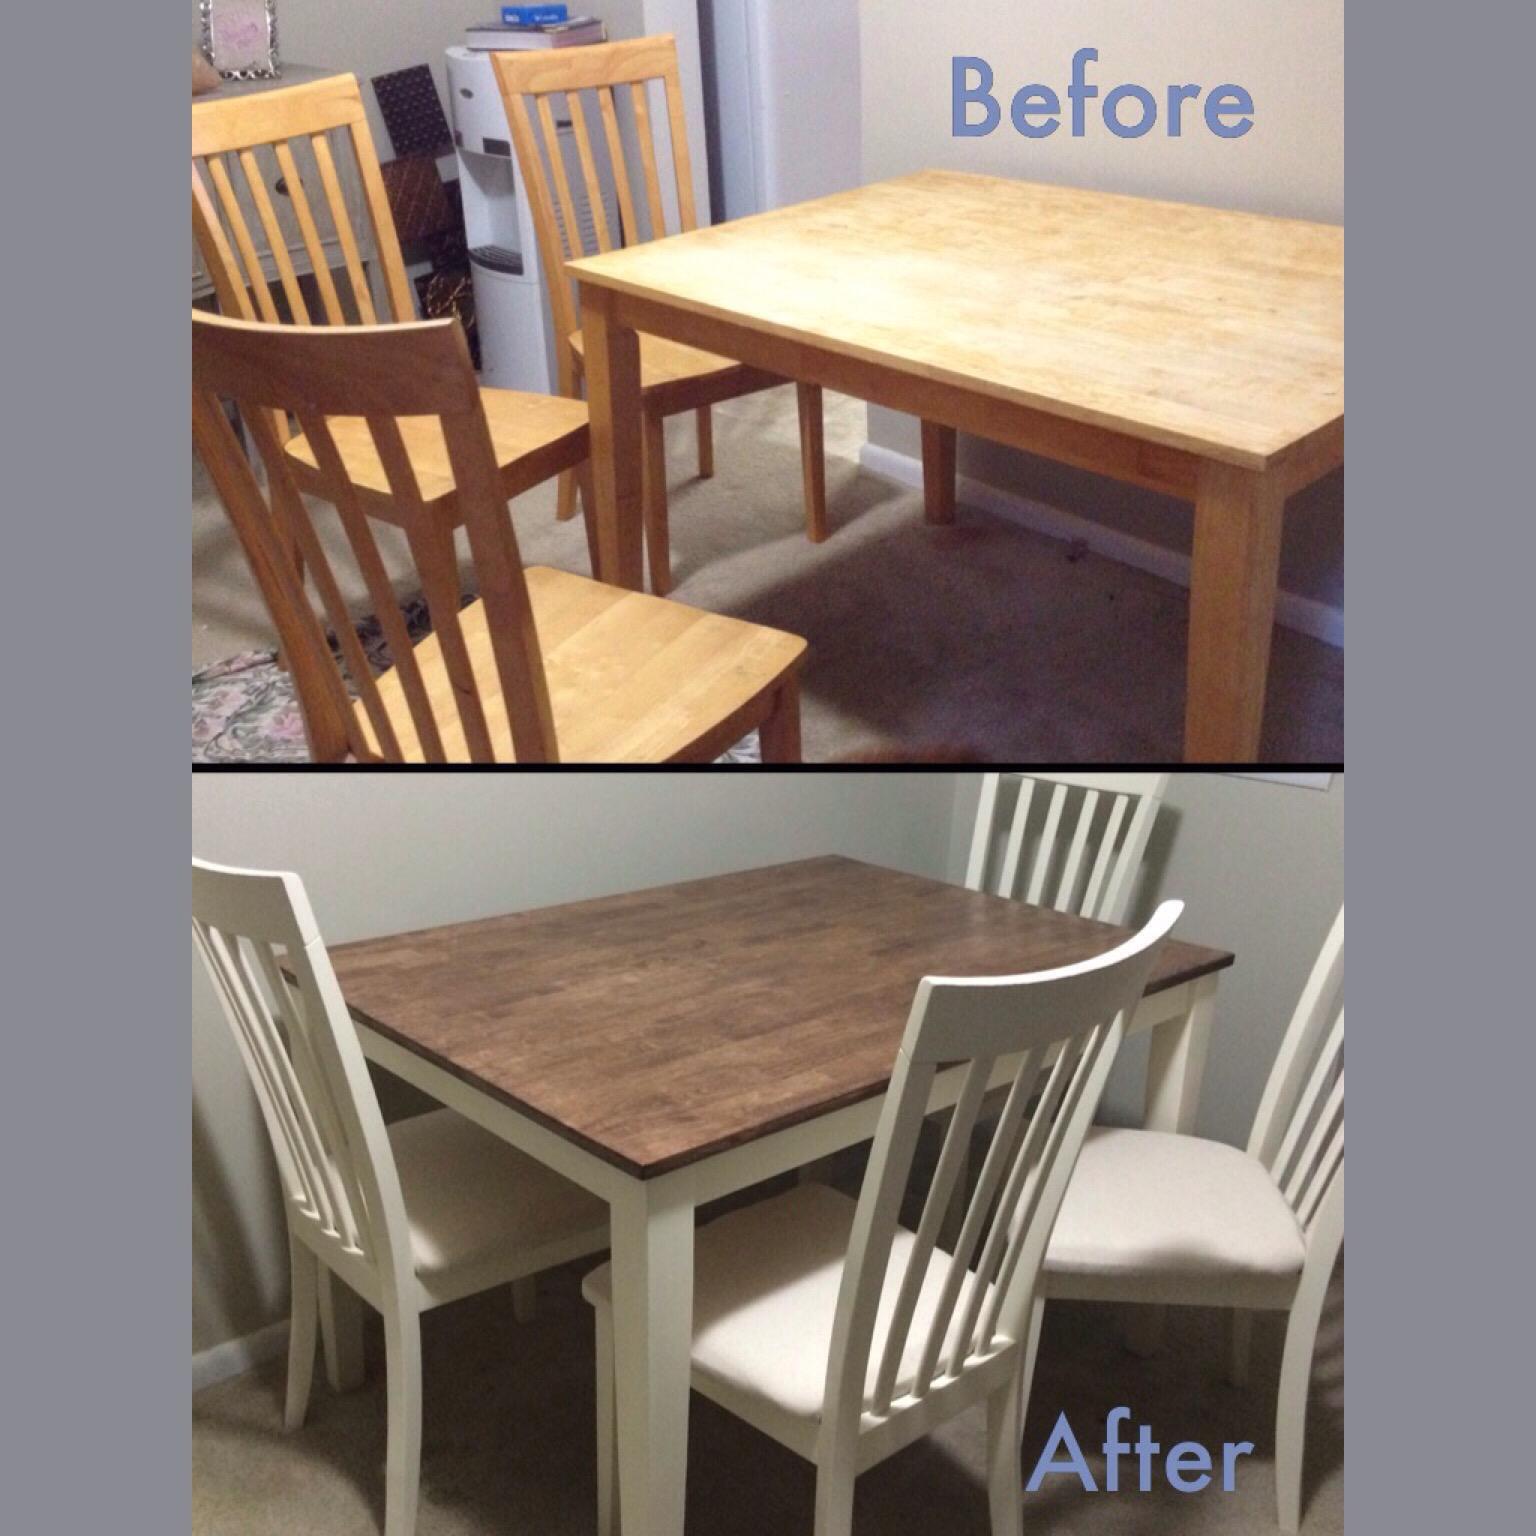 How to make your old table look new for around $80 or less - B+C Guides